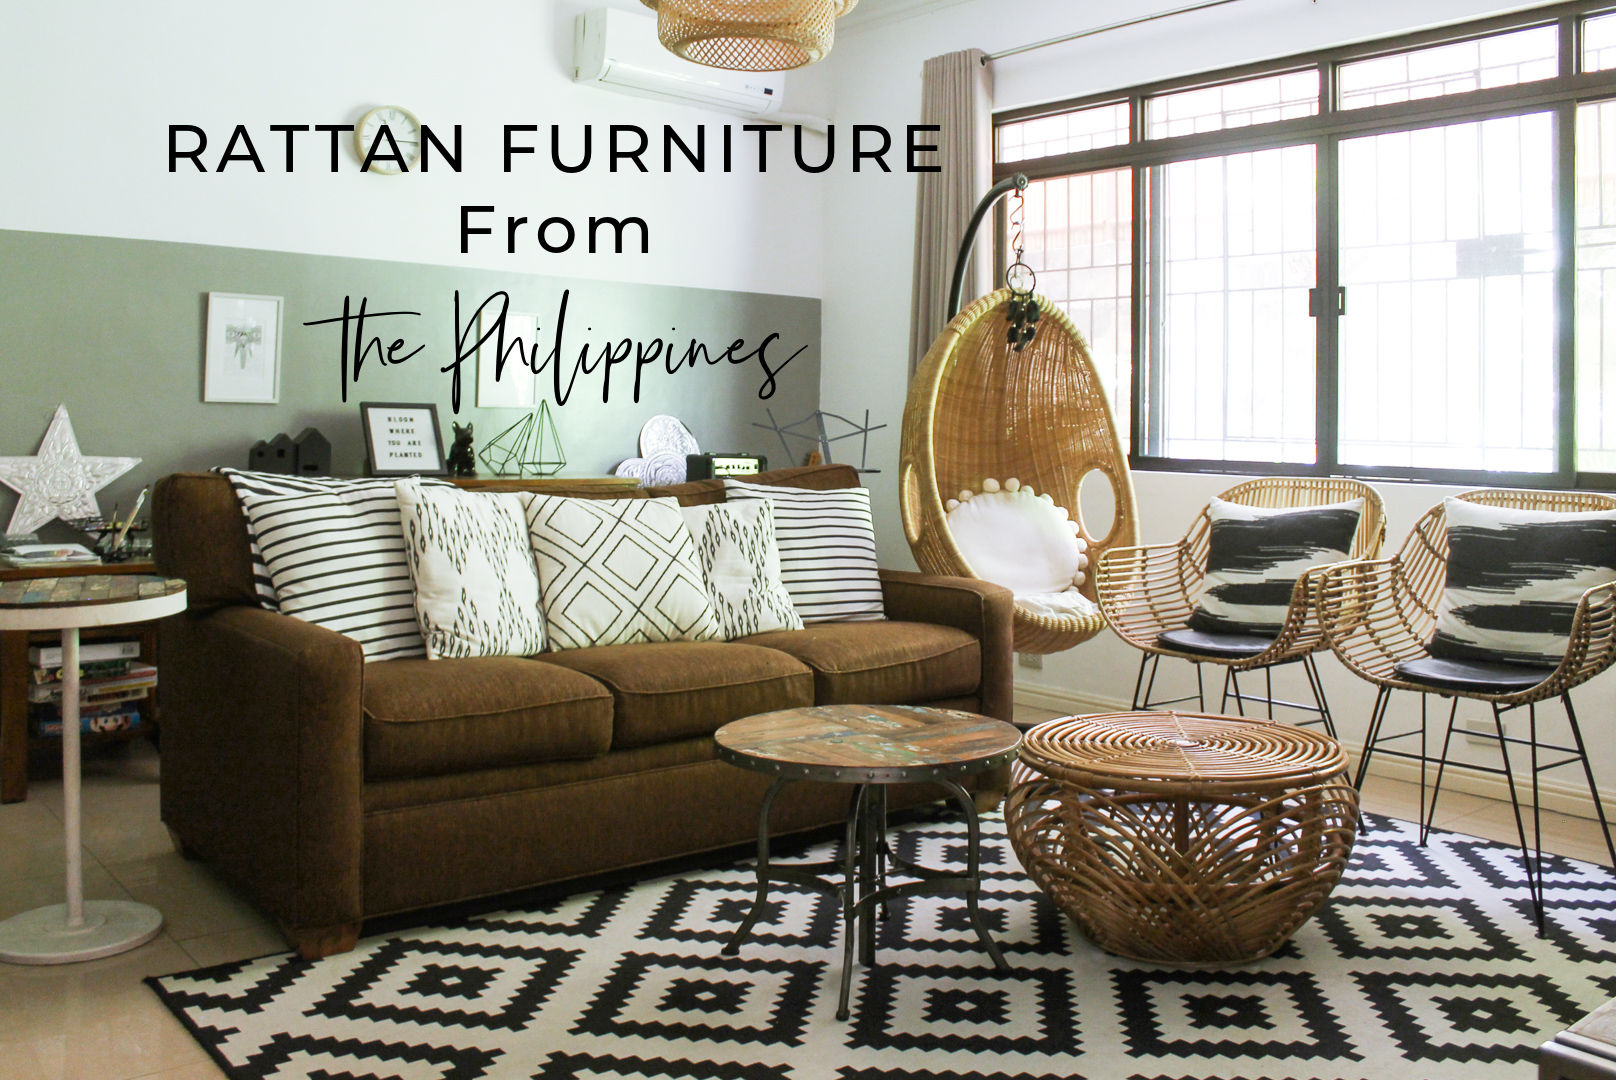 Rattan Furniture From The Philippines